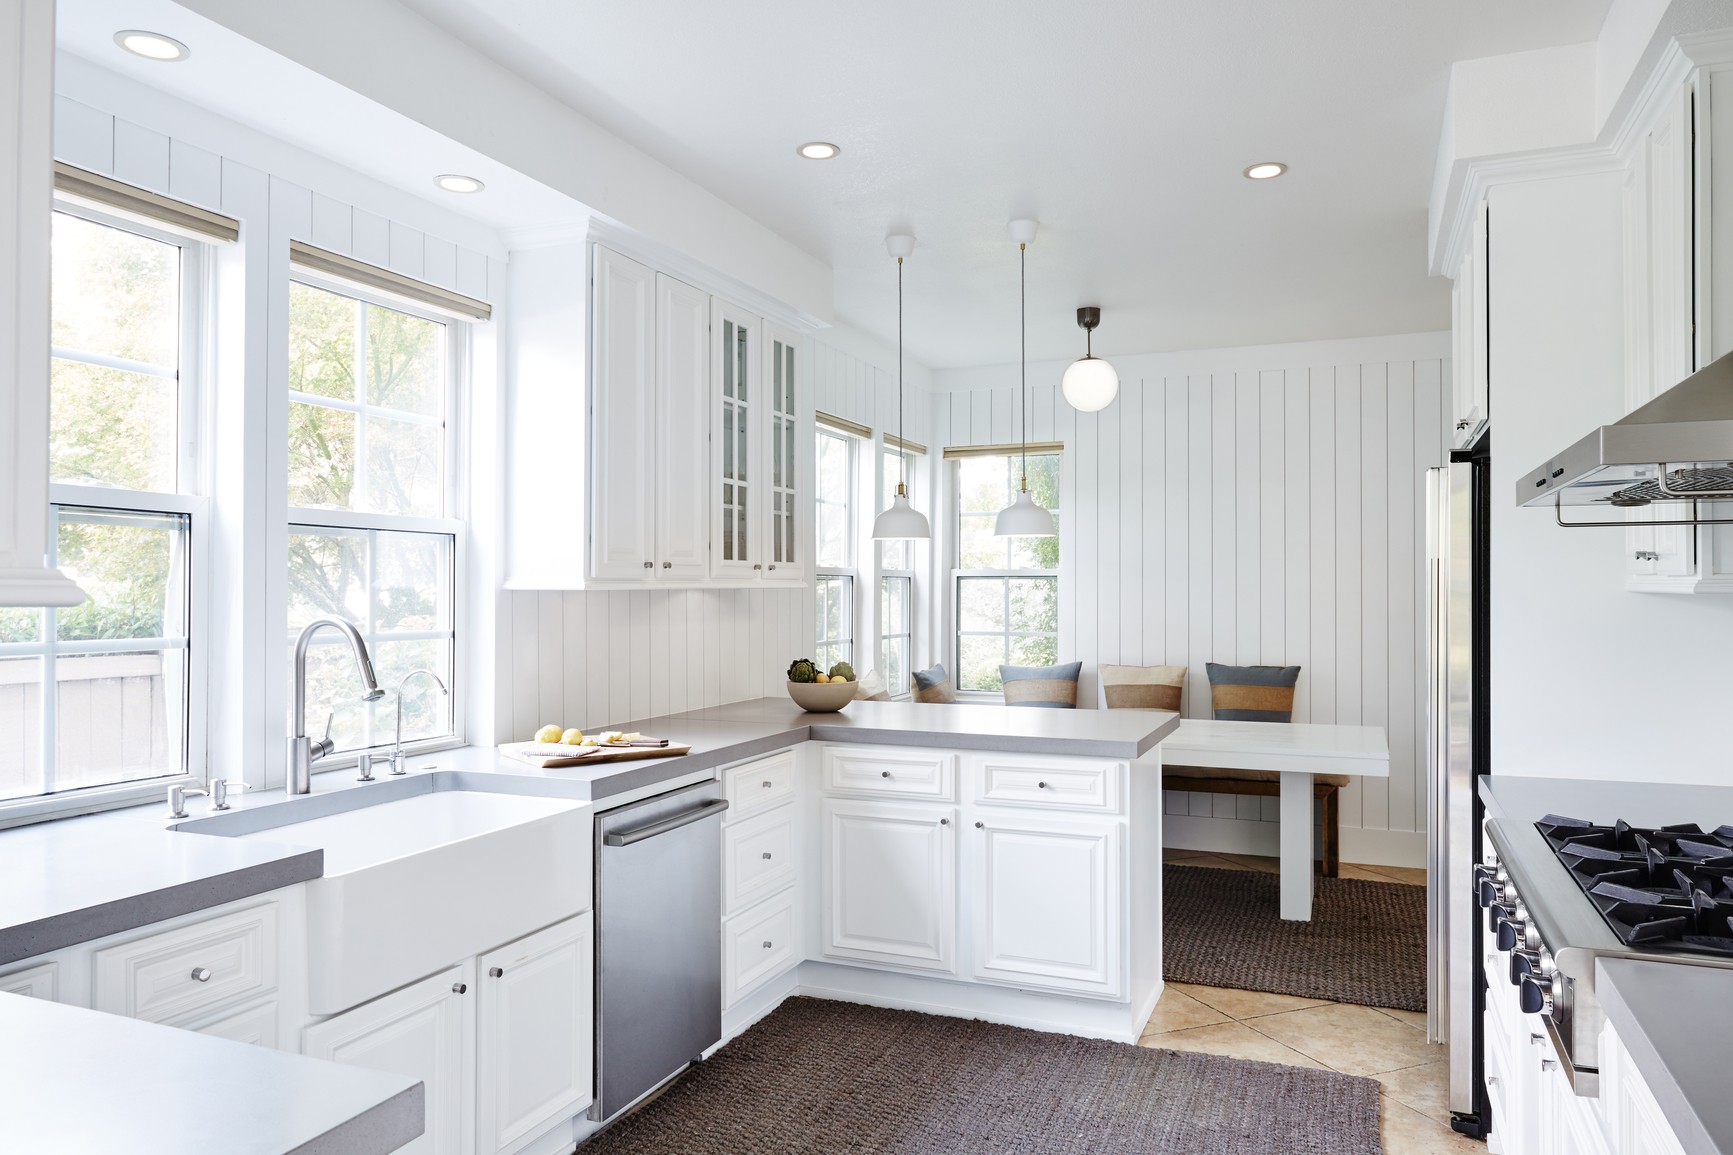 What Are The Kitchen Remodels That Increase Home Value?